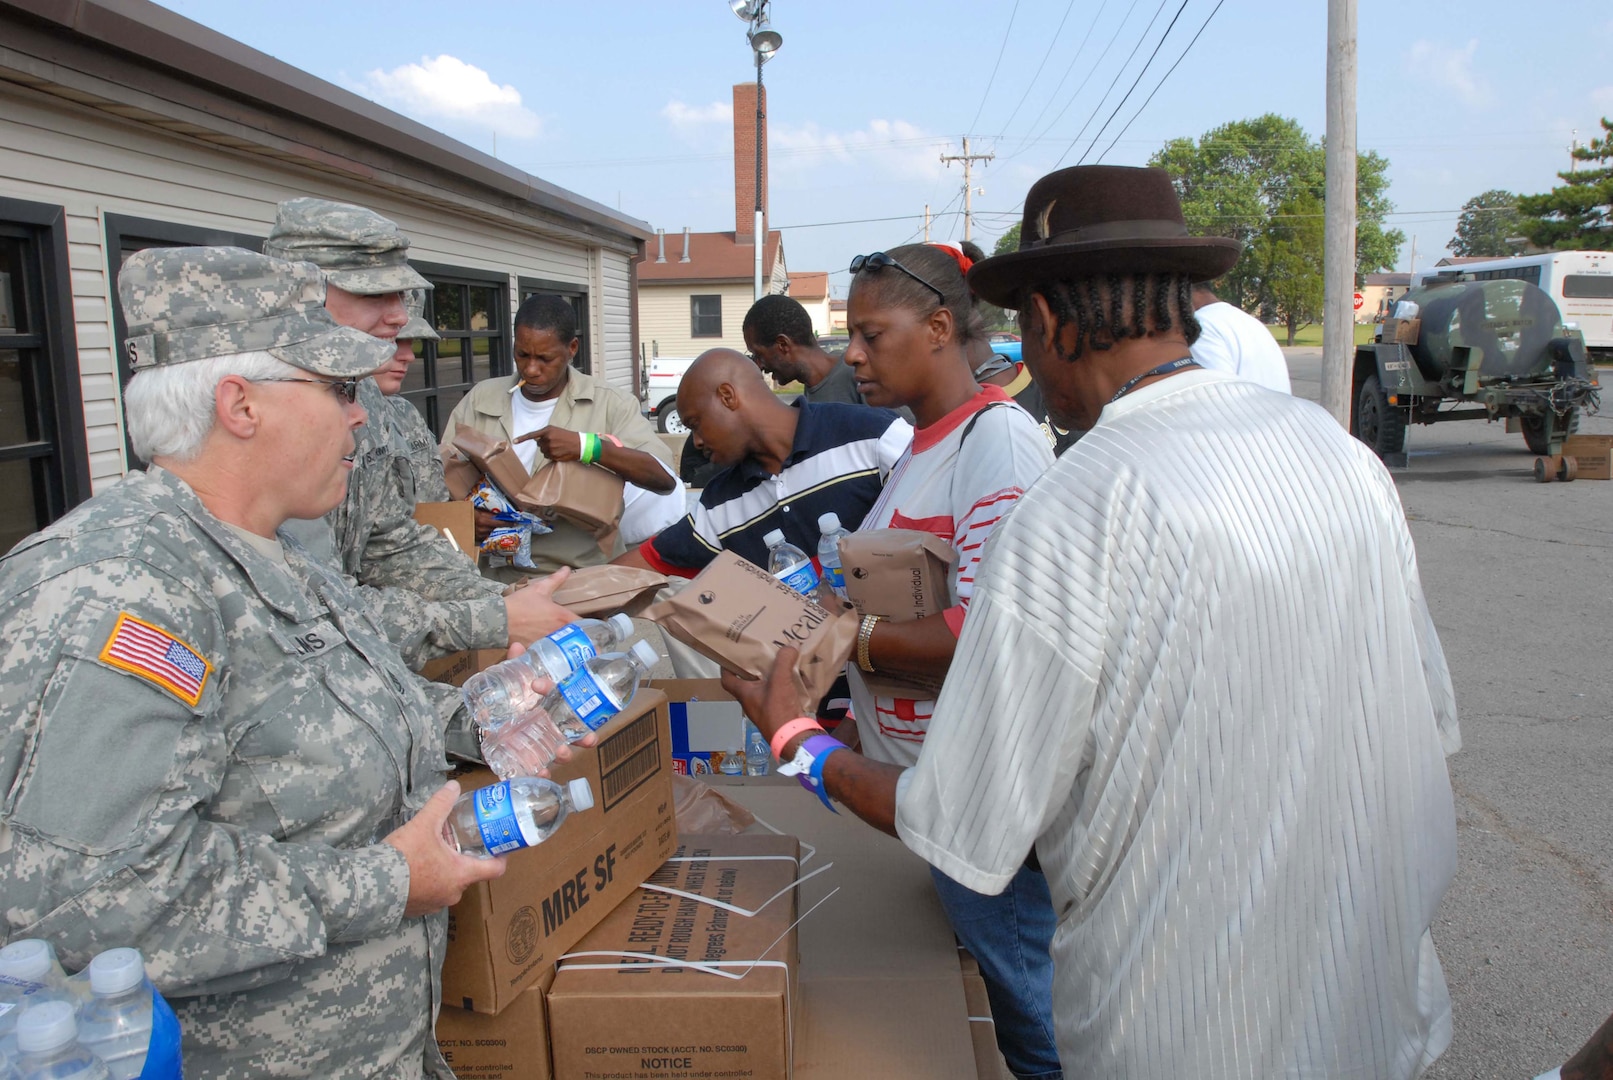 Members of the Arkansas Army National Guard's 142nd Fires Brigade hand out water and packaged military meals (MREs -Meals Ready to Eat) to individuals at Fort Chaffee who sought shelter from Hurricane Gustav. The World War II era post is housing over 2,300 displaced citizens while the Salvation Army is on hand at Fort Chaffee to take the lead role in feeding the evacuees. Fort Chaffee processed over 10,000 evacuees in the aftermath of Hurricane Katrina three years ago.